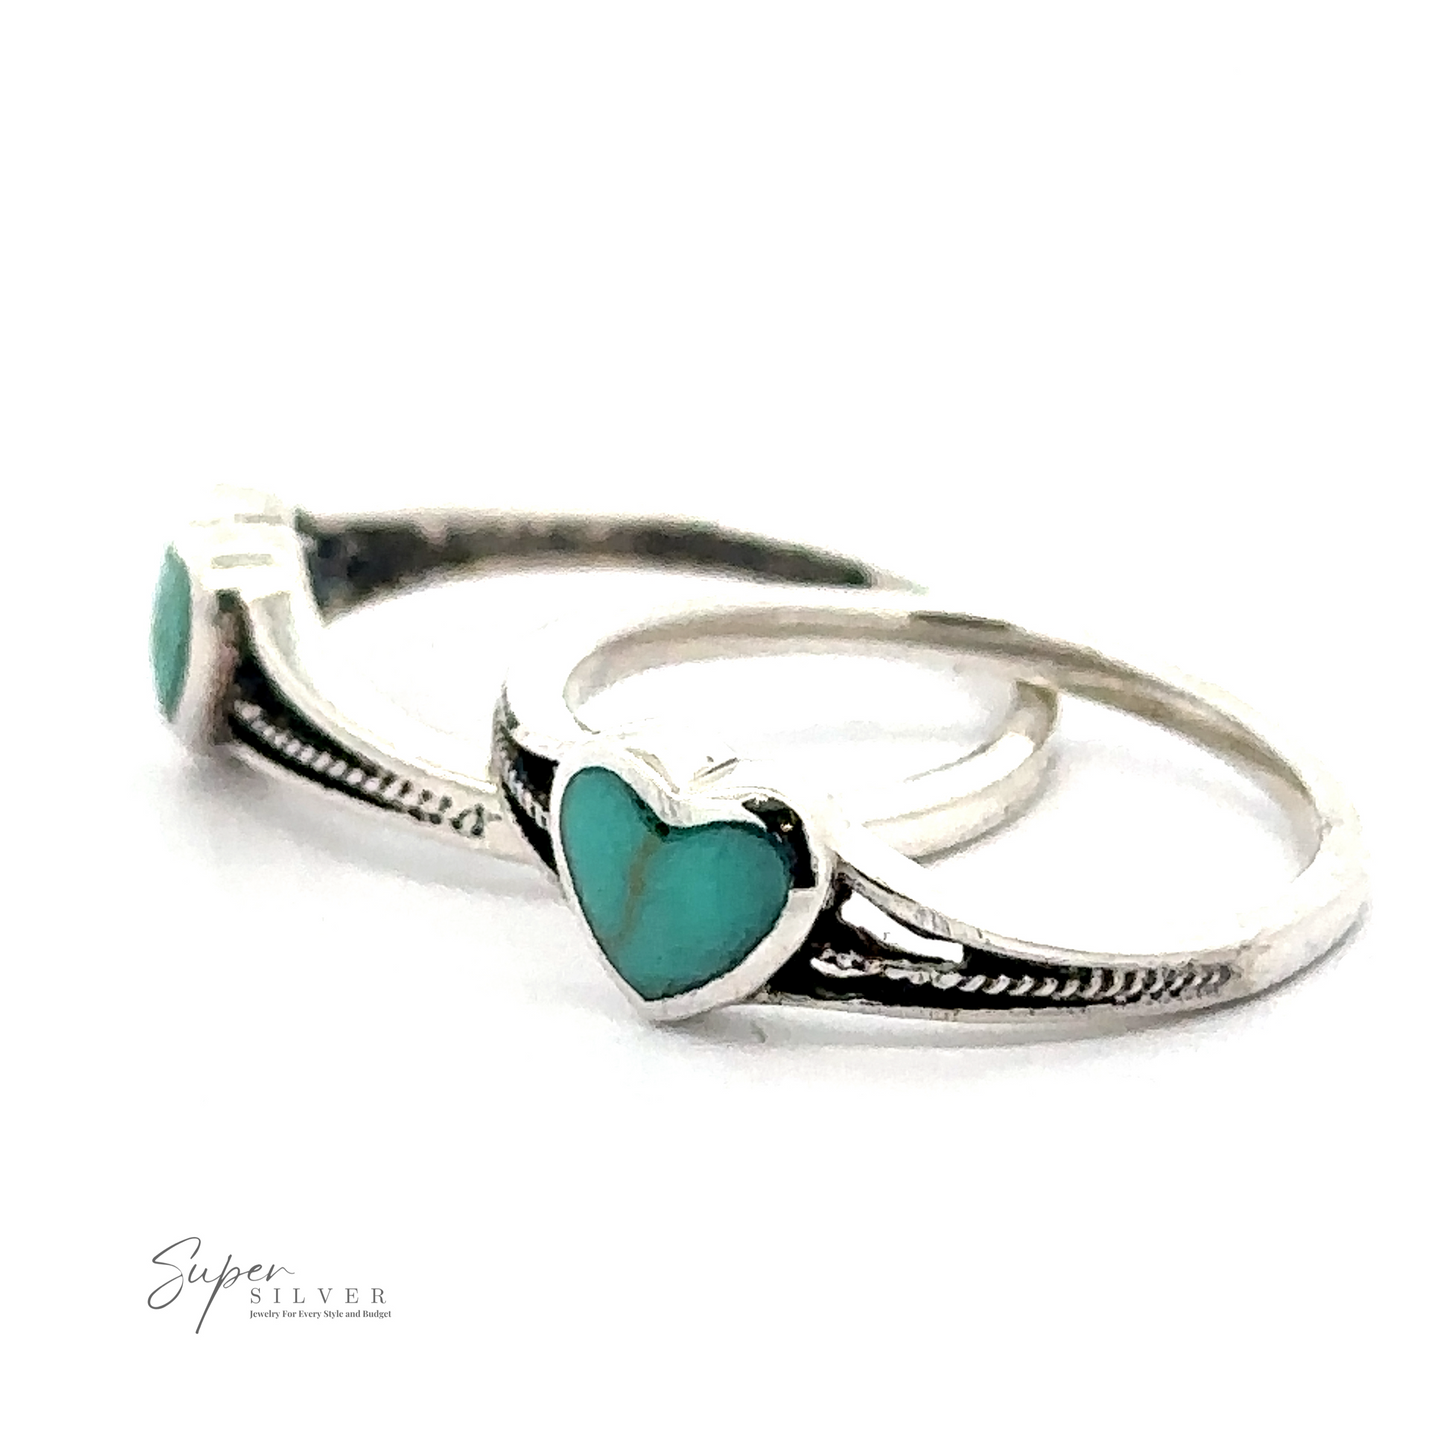 Two sterling silver rings with adorable Small Inlaid Turquoise Heart Rings. The rings boast a detailed design, and the text "Super Silver" is visible in the bottom-left corner. Perfect for lovers of turquoise stone jewelry.